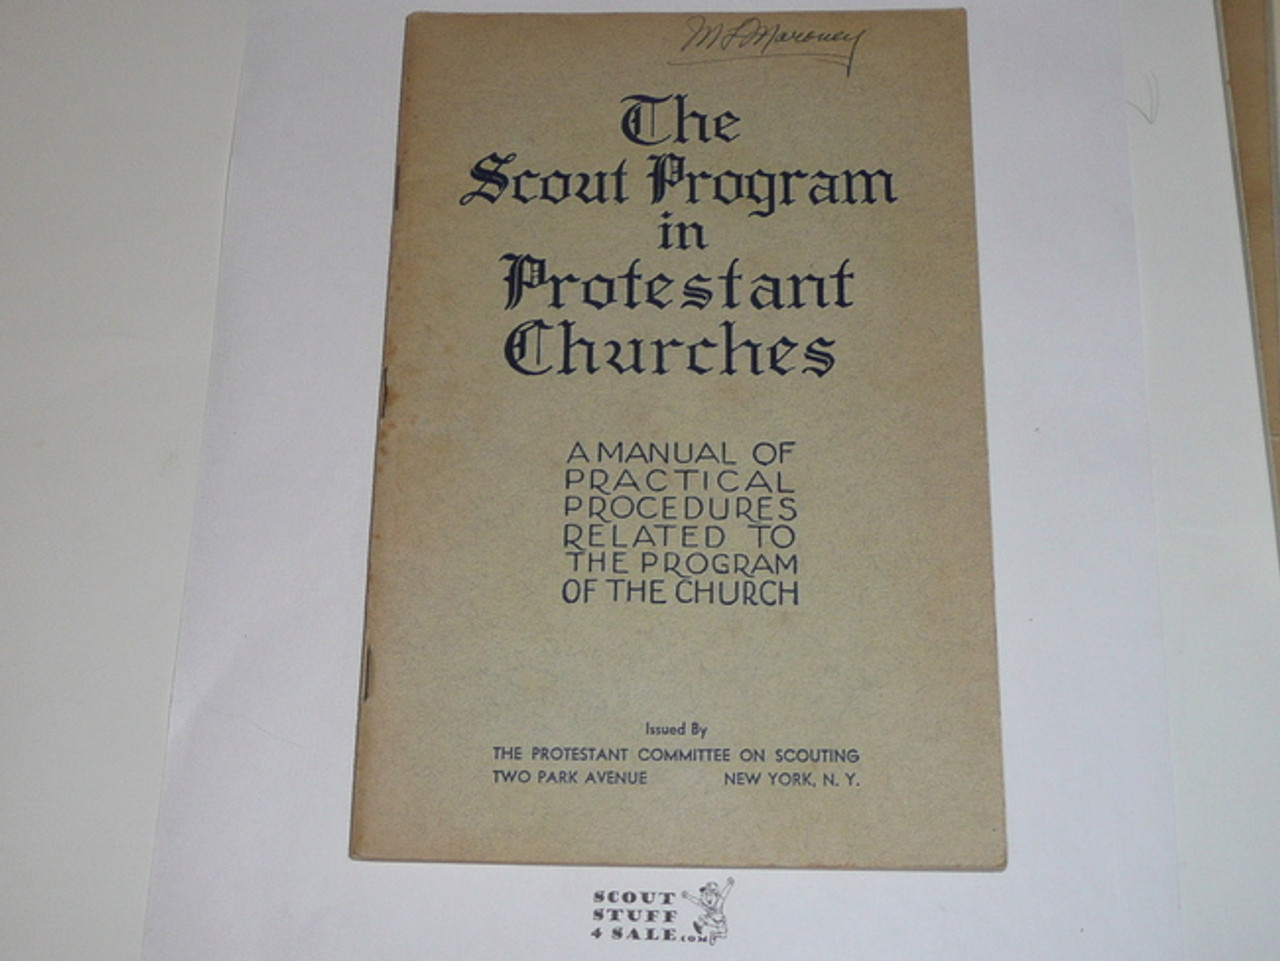 Protestant, The Scouting Program in Protestant Churches, mid-1930's printing